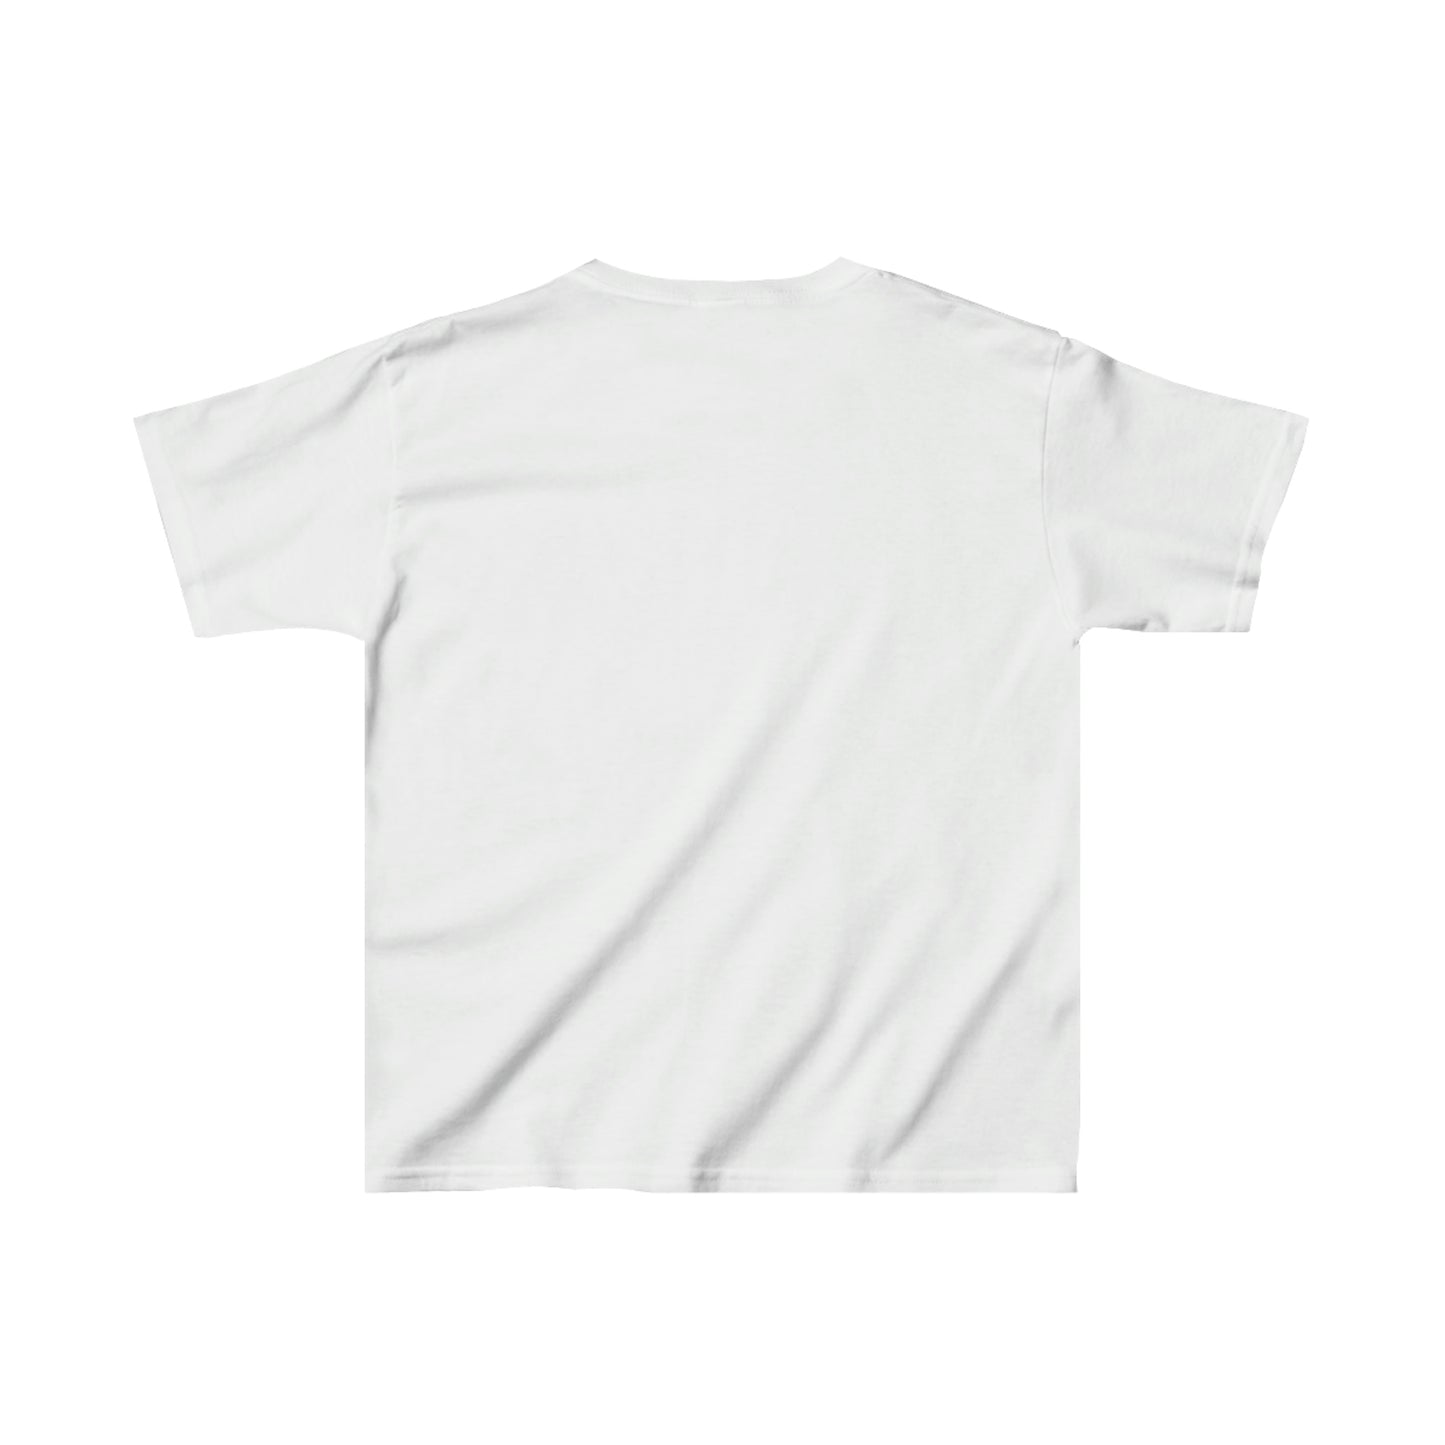 Youth Heavy Cotton™ Tee, South Tiger Classic (Multiple Colors Available)